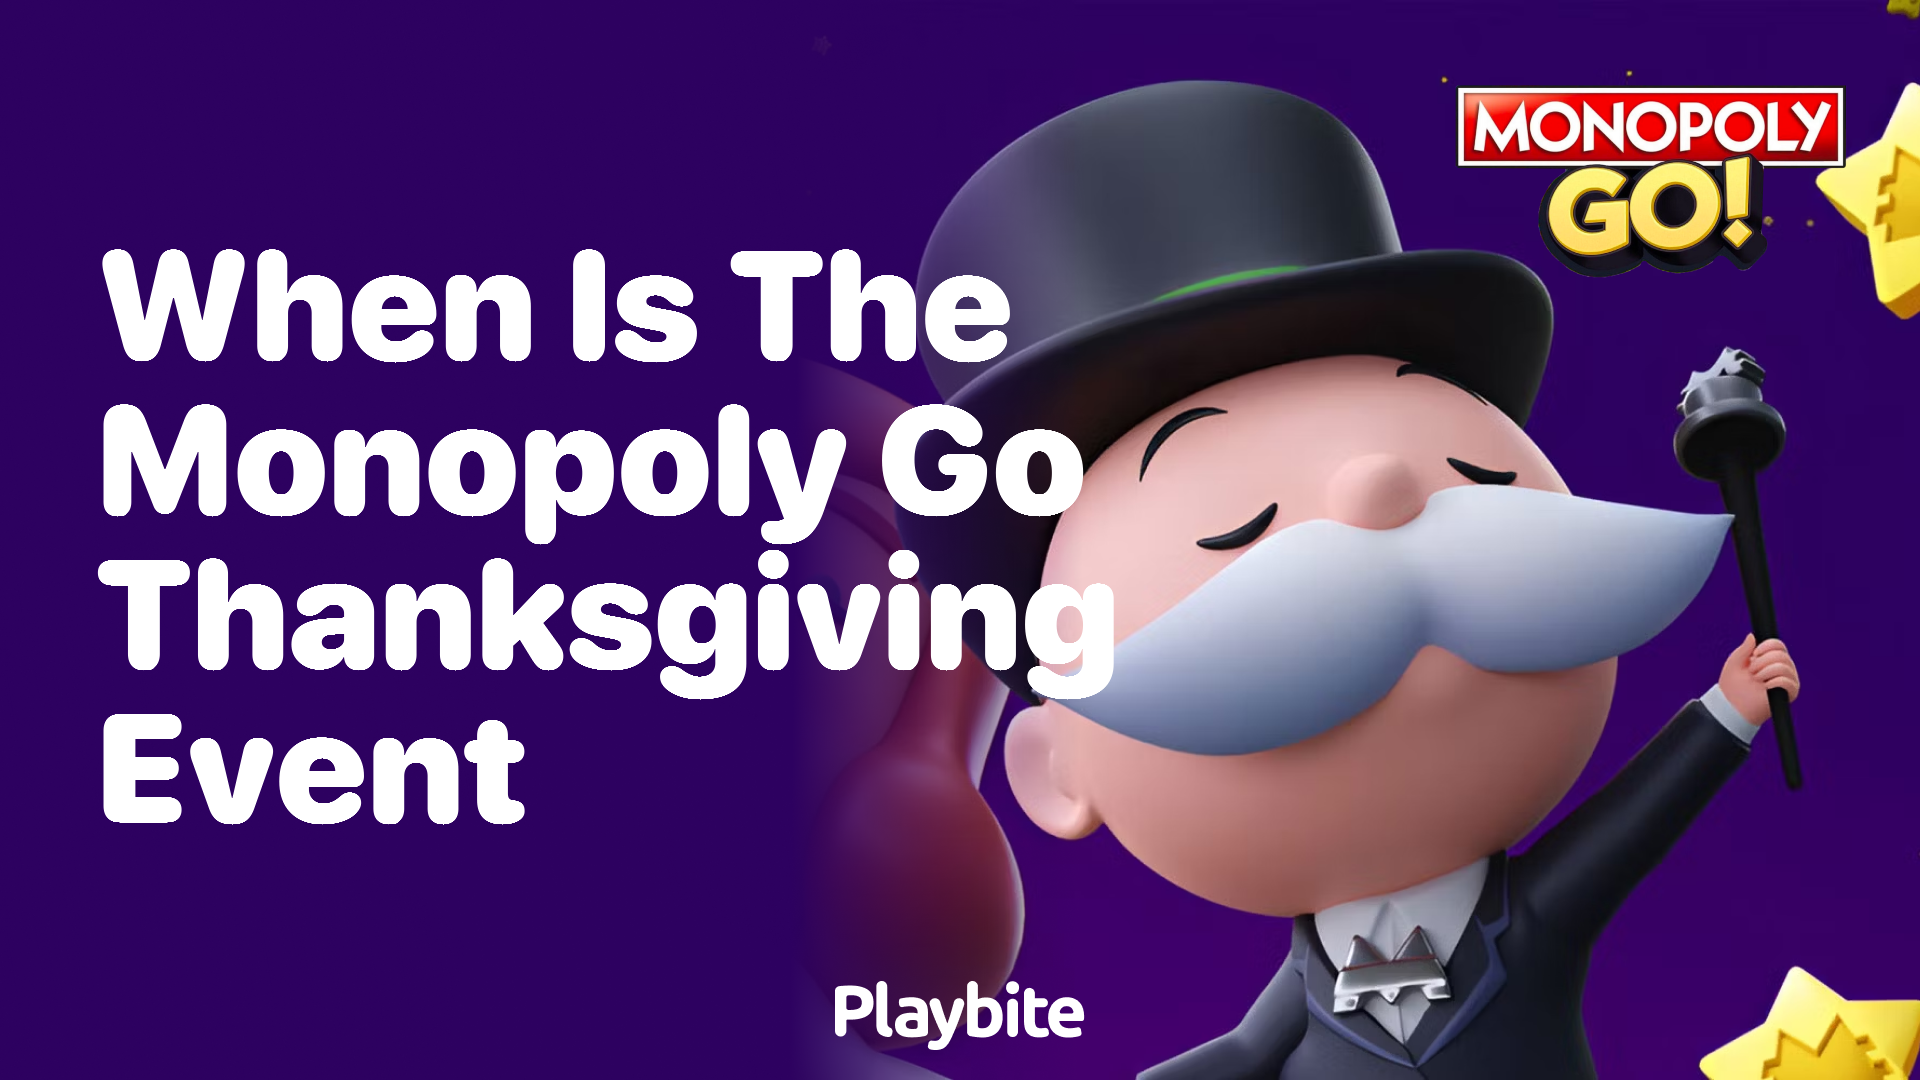 When Is the Monopoly Go Thanksgiving Event?